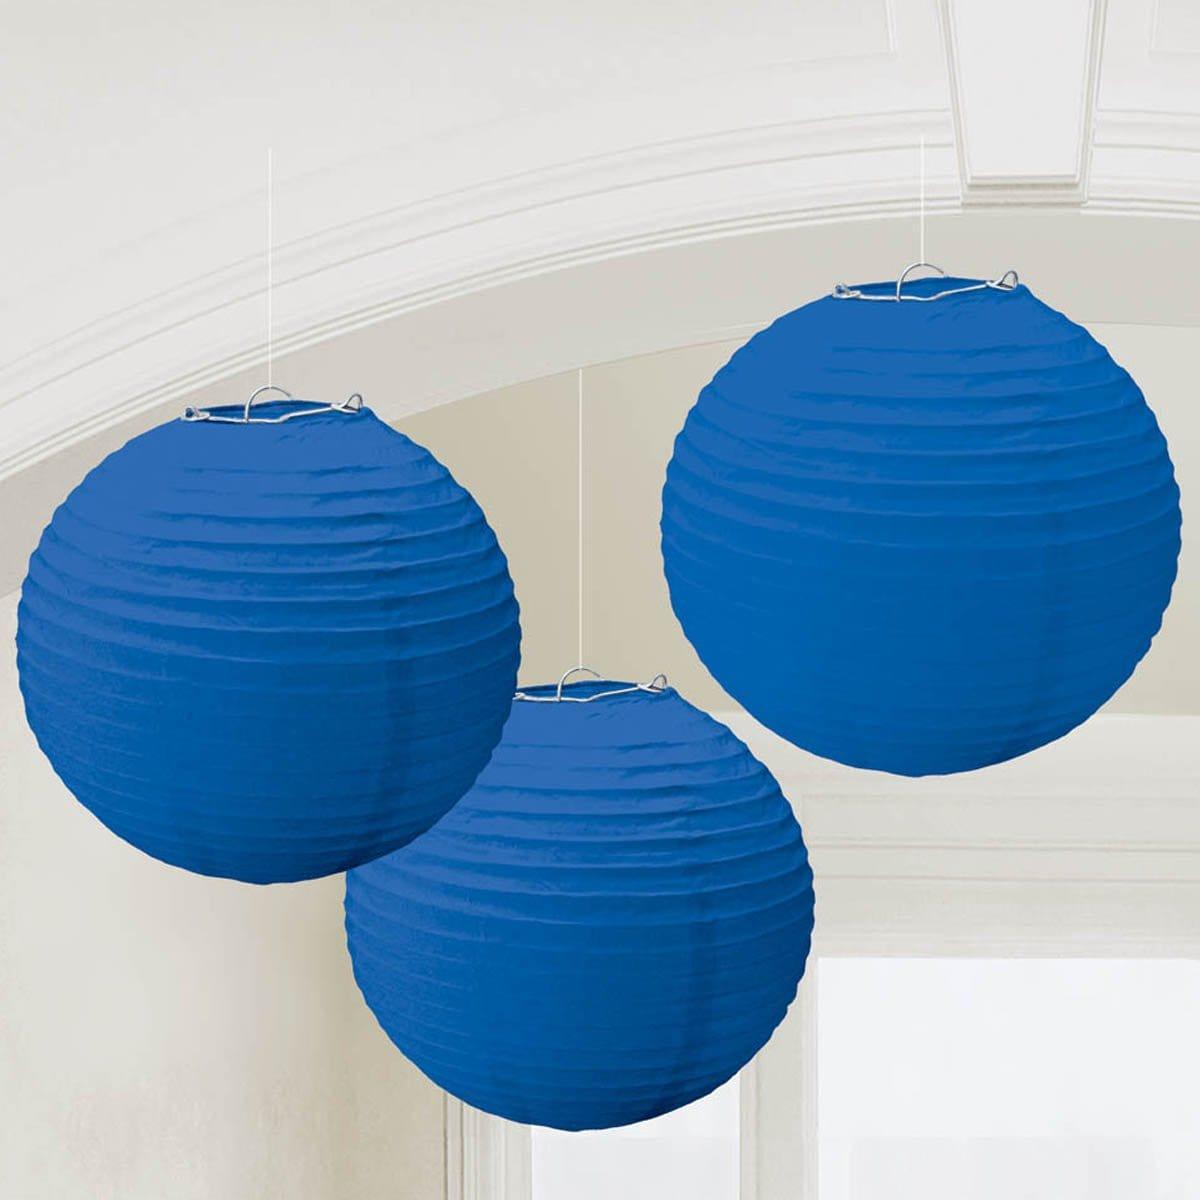 Buy Decorations Round Lanterns - Bright Royal Blue, 9.5 inches sold at Party Expert